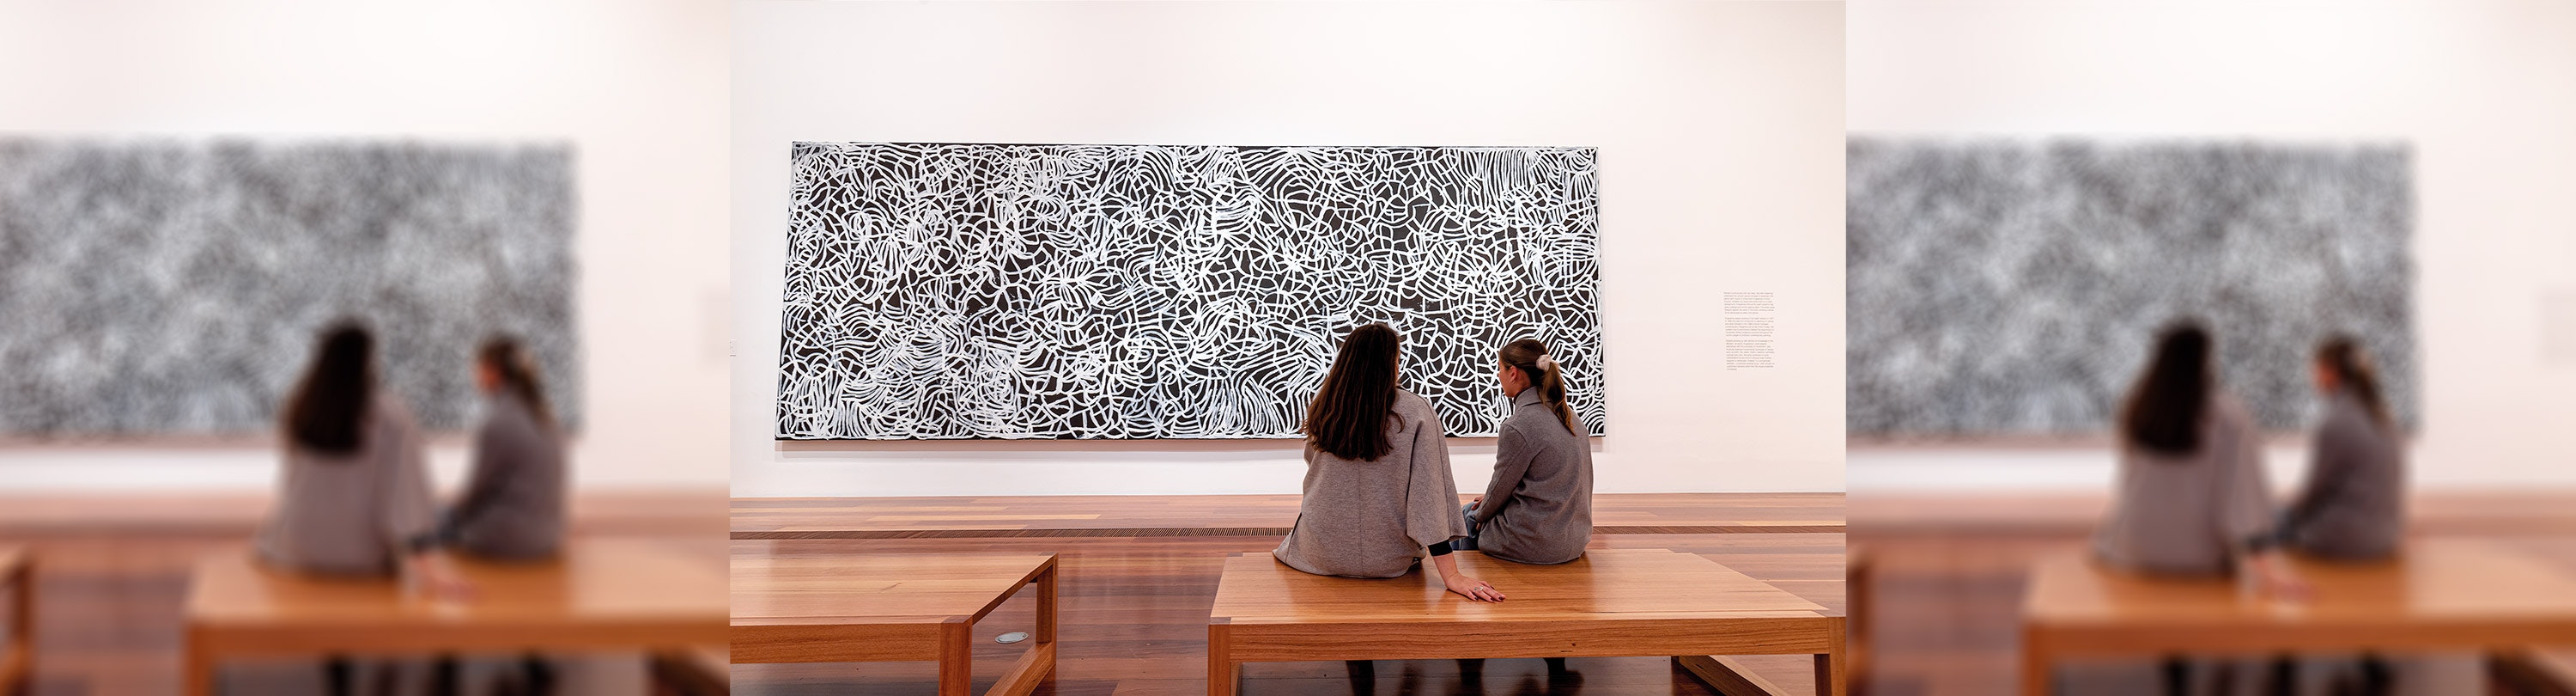 Two women sitting on a bench in The Ian Potter Centre: NGV Australia looking at a painting